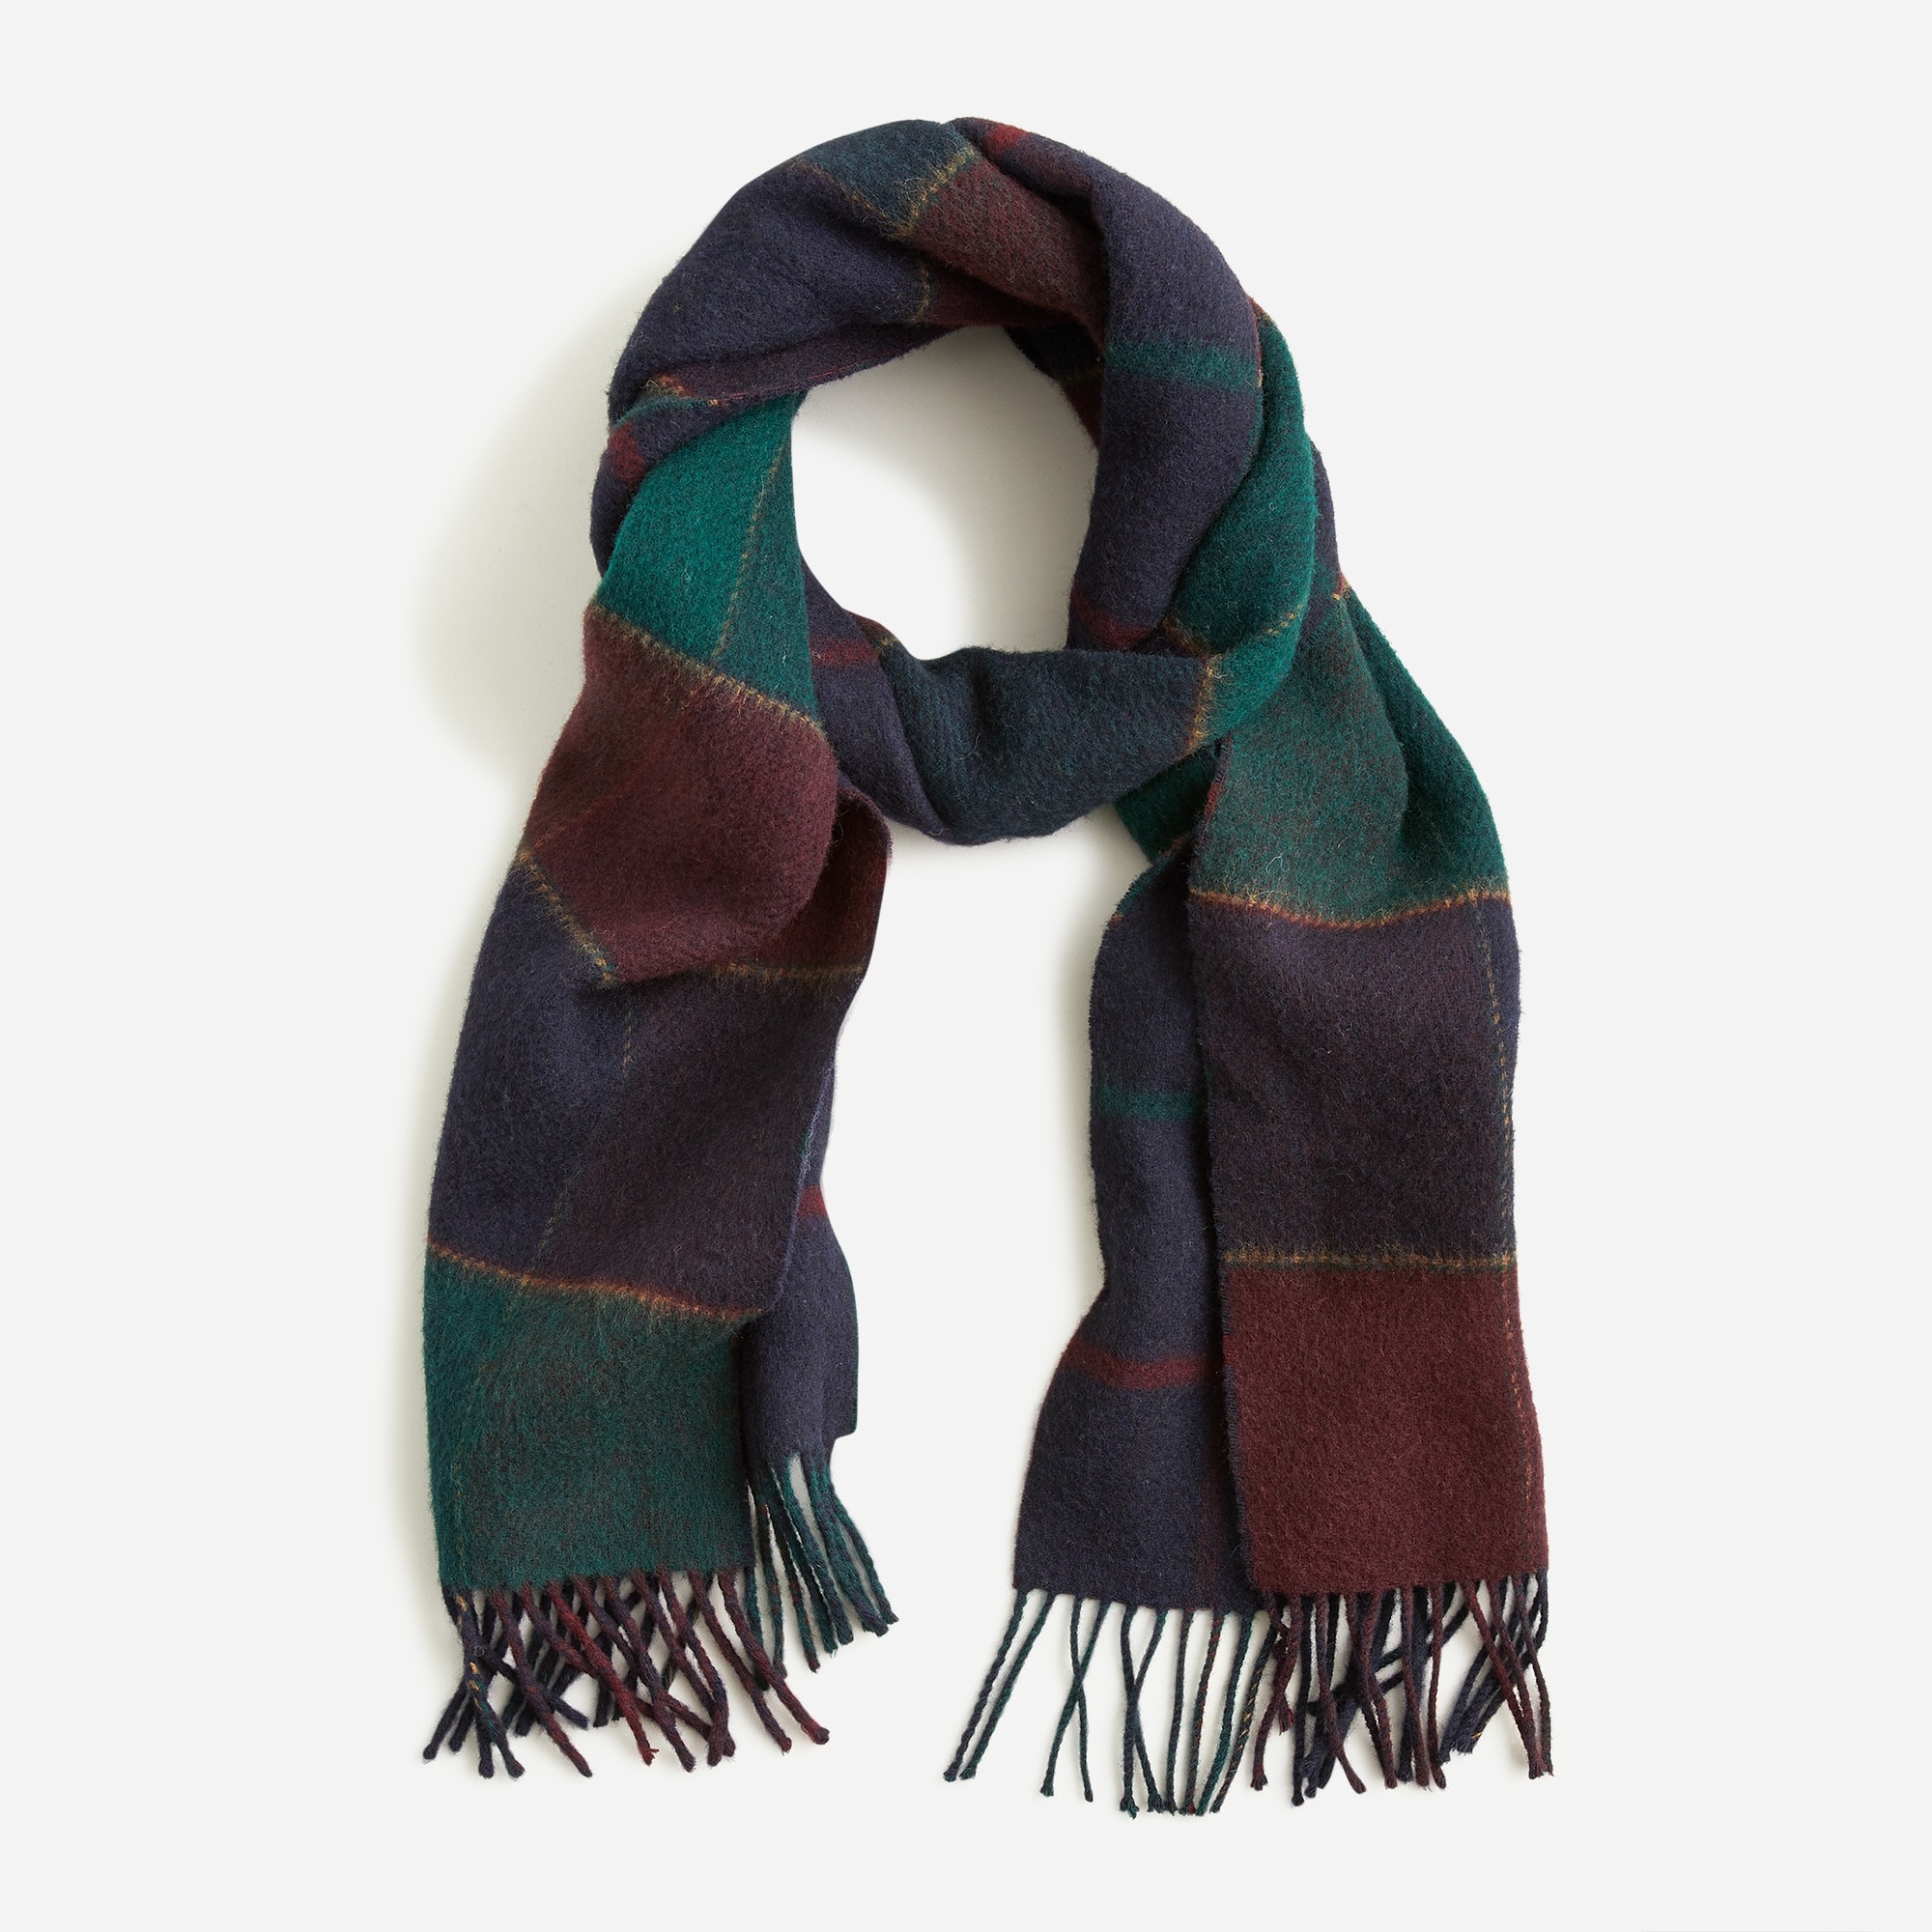 Jcrew Abraham Moon u0026amp; Sons for J.Crew double-faced scarf in English wool